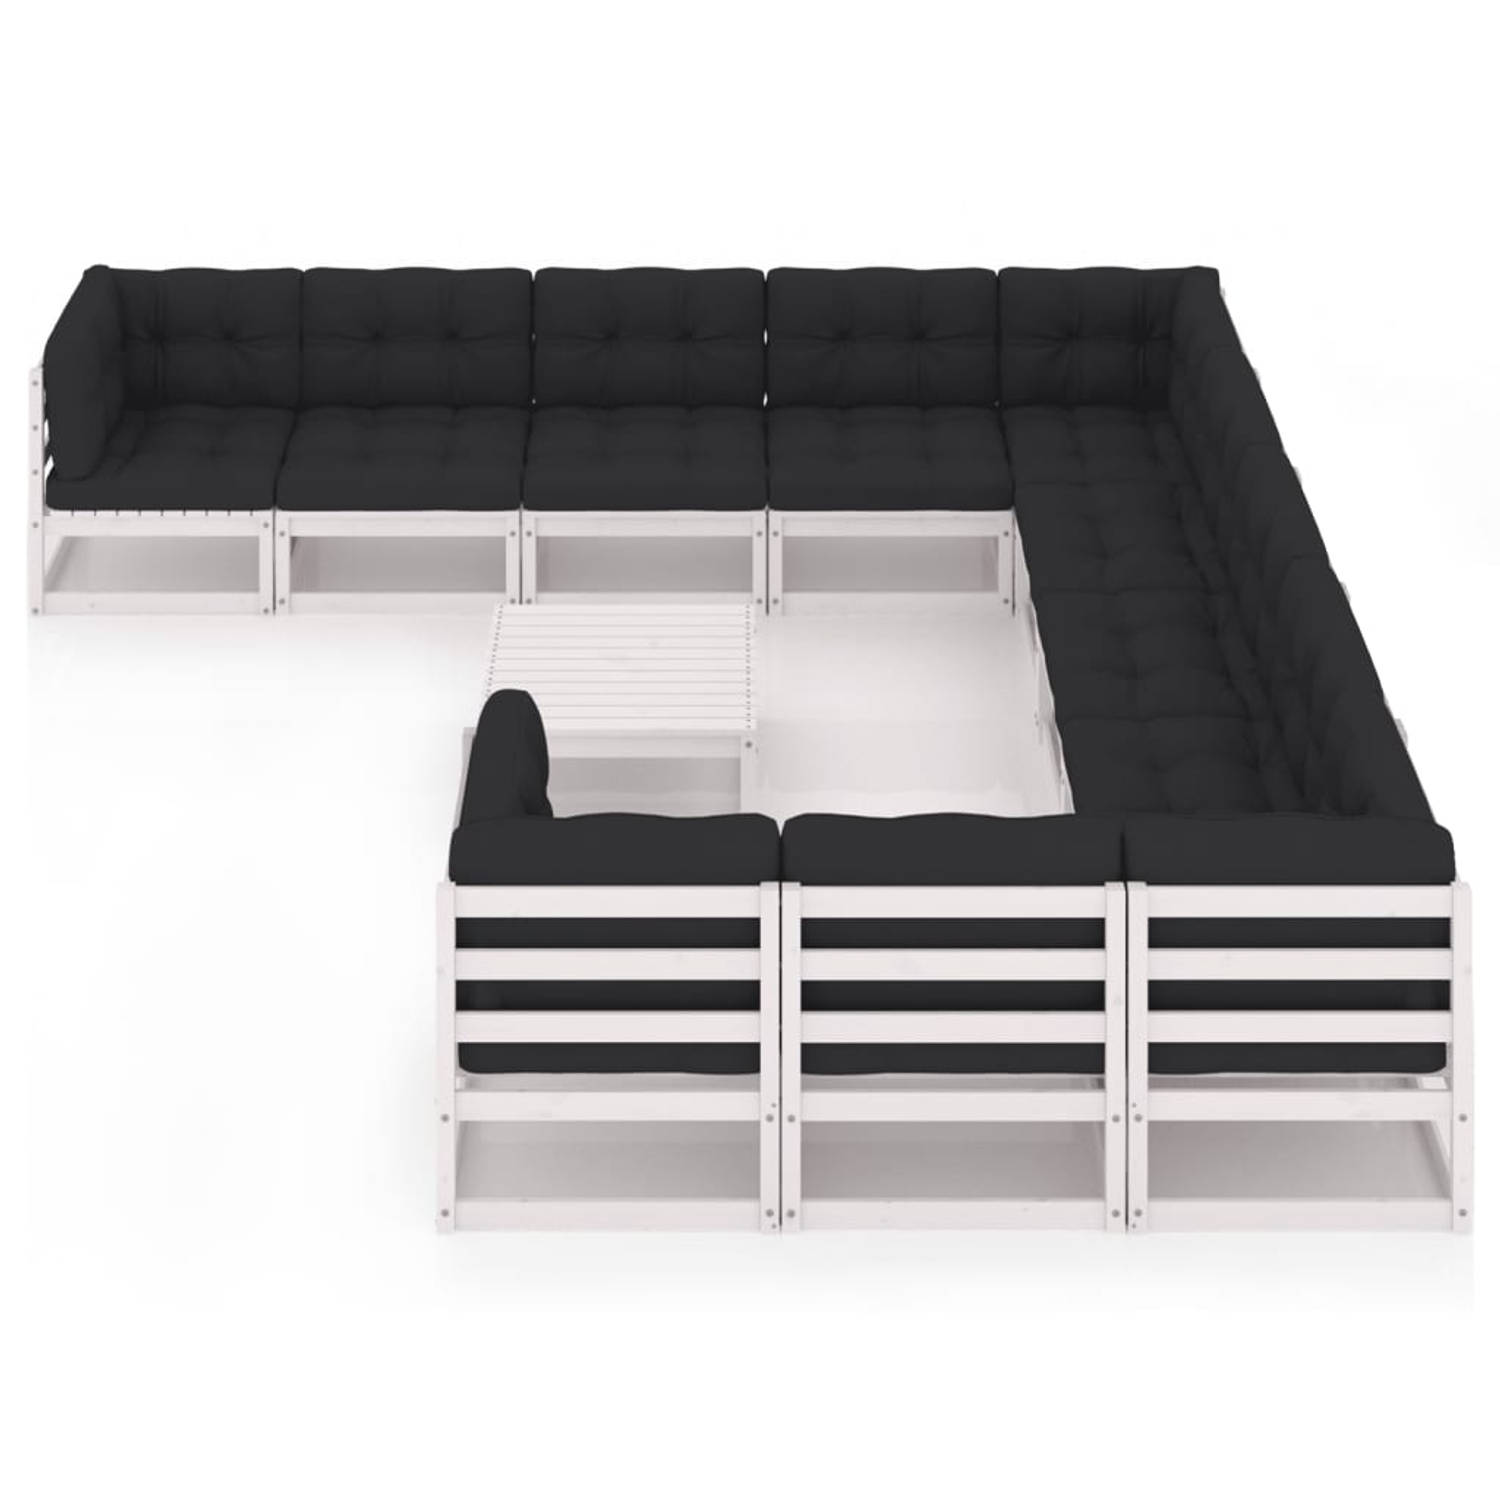 The Living Store Tuinset Grenenhout - Lounge - Wit - 70 x 70 x 67 cm - inclusief kussens